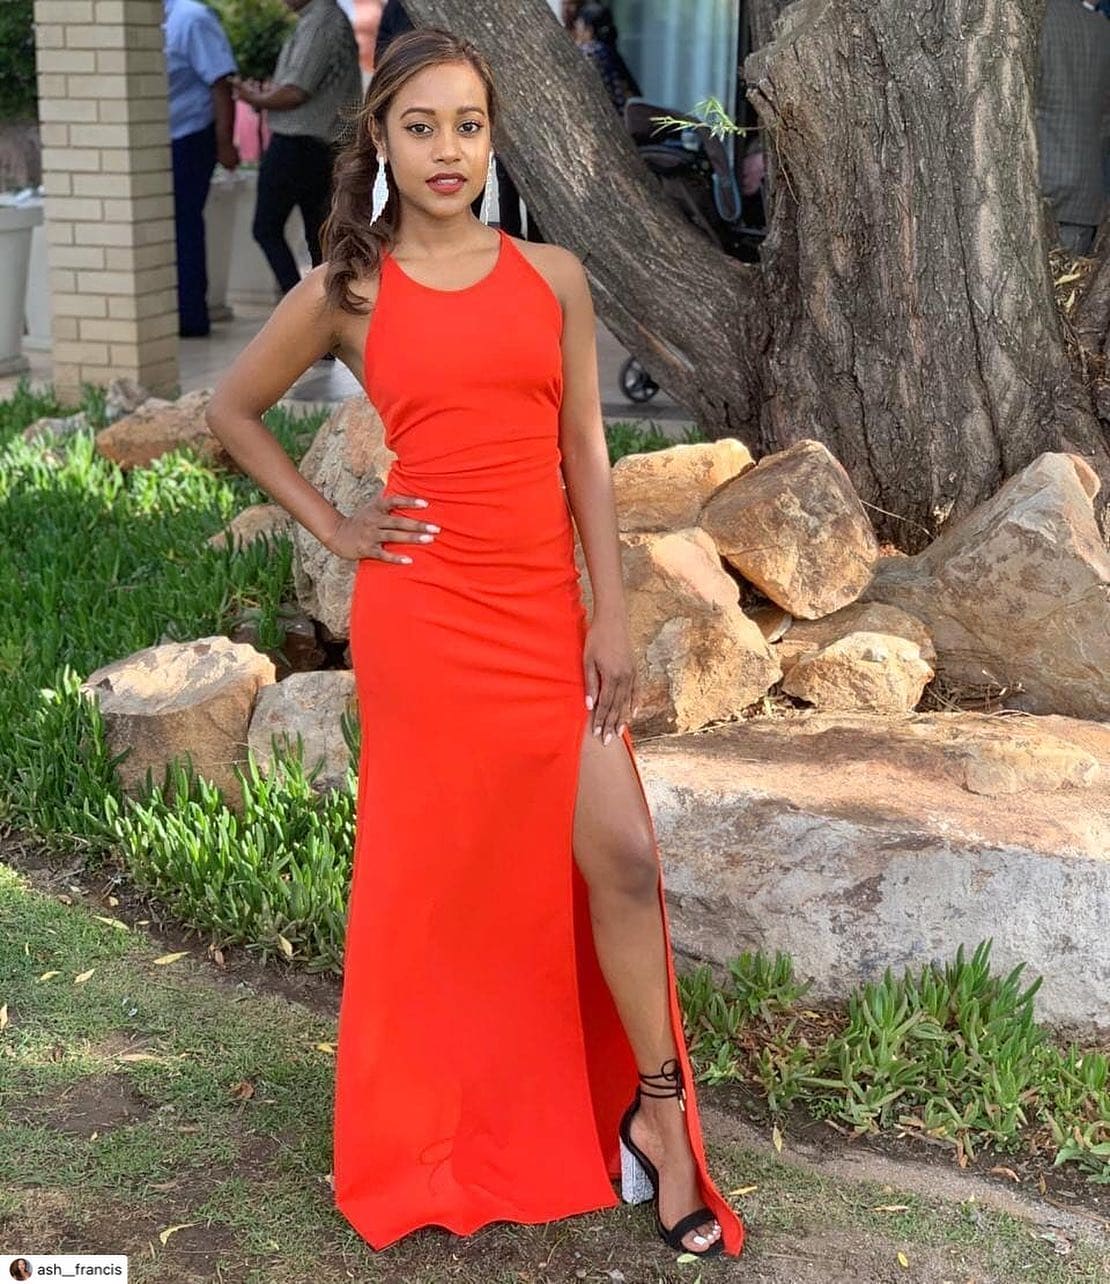 A woman in a red dress posing for a picture